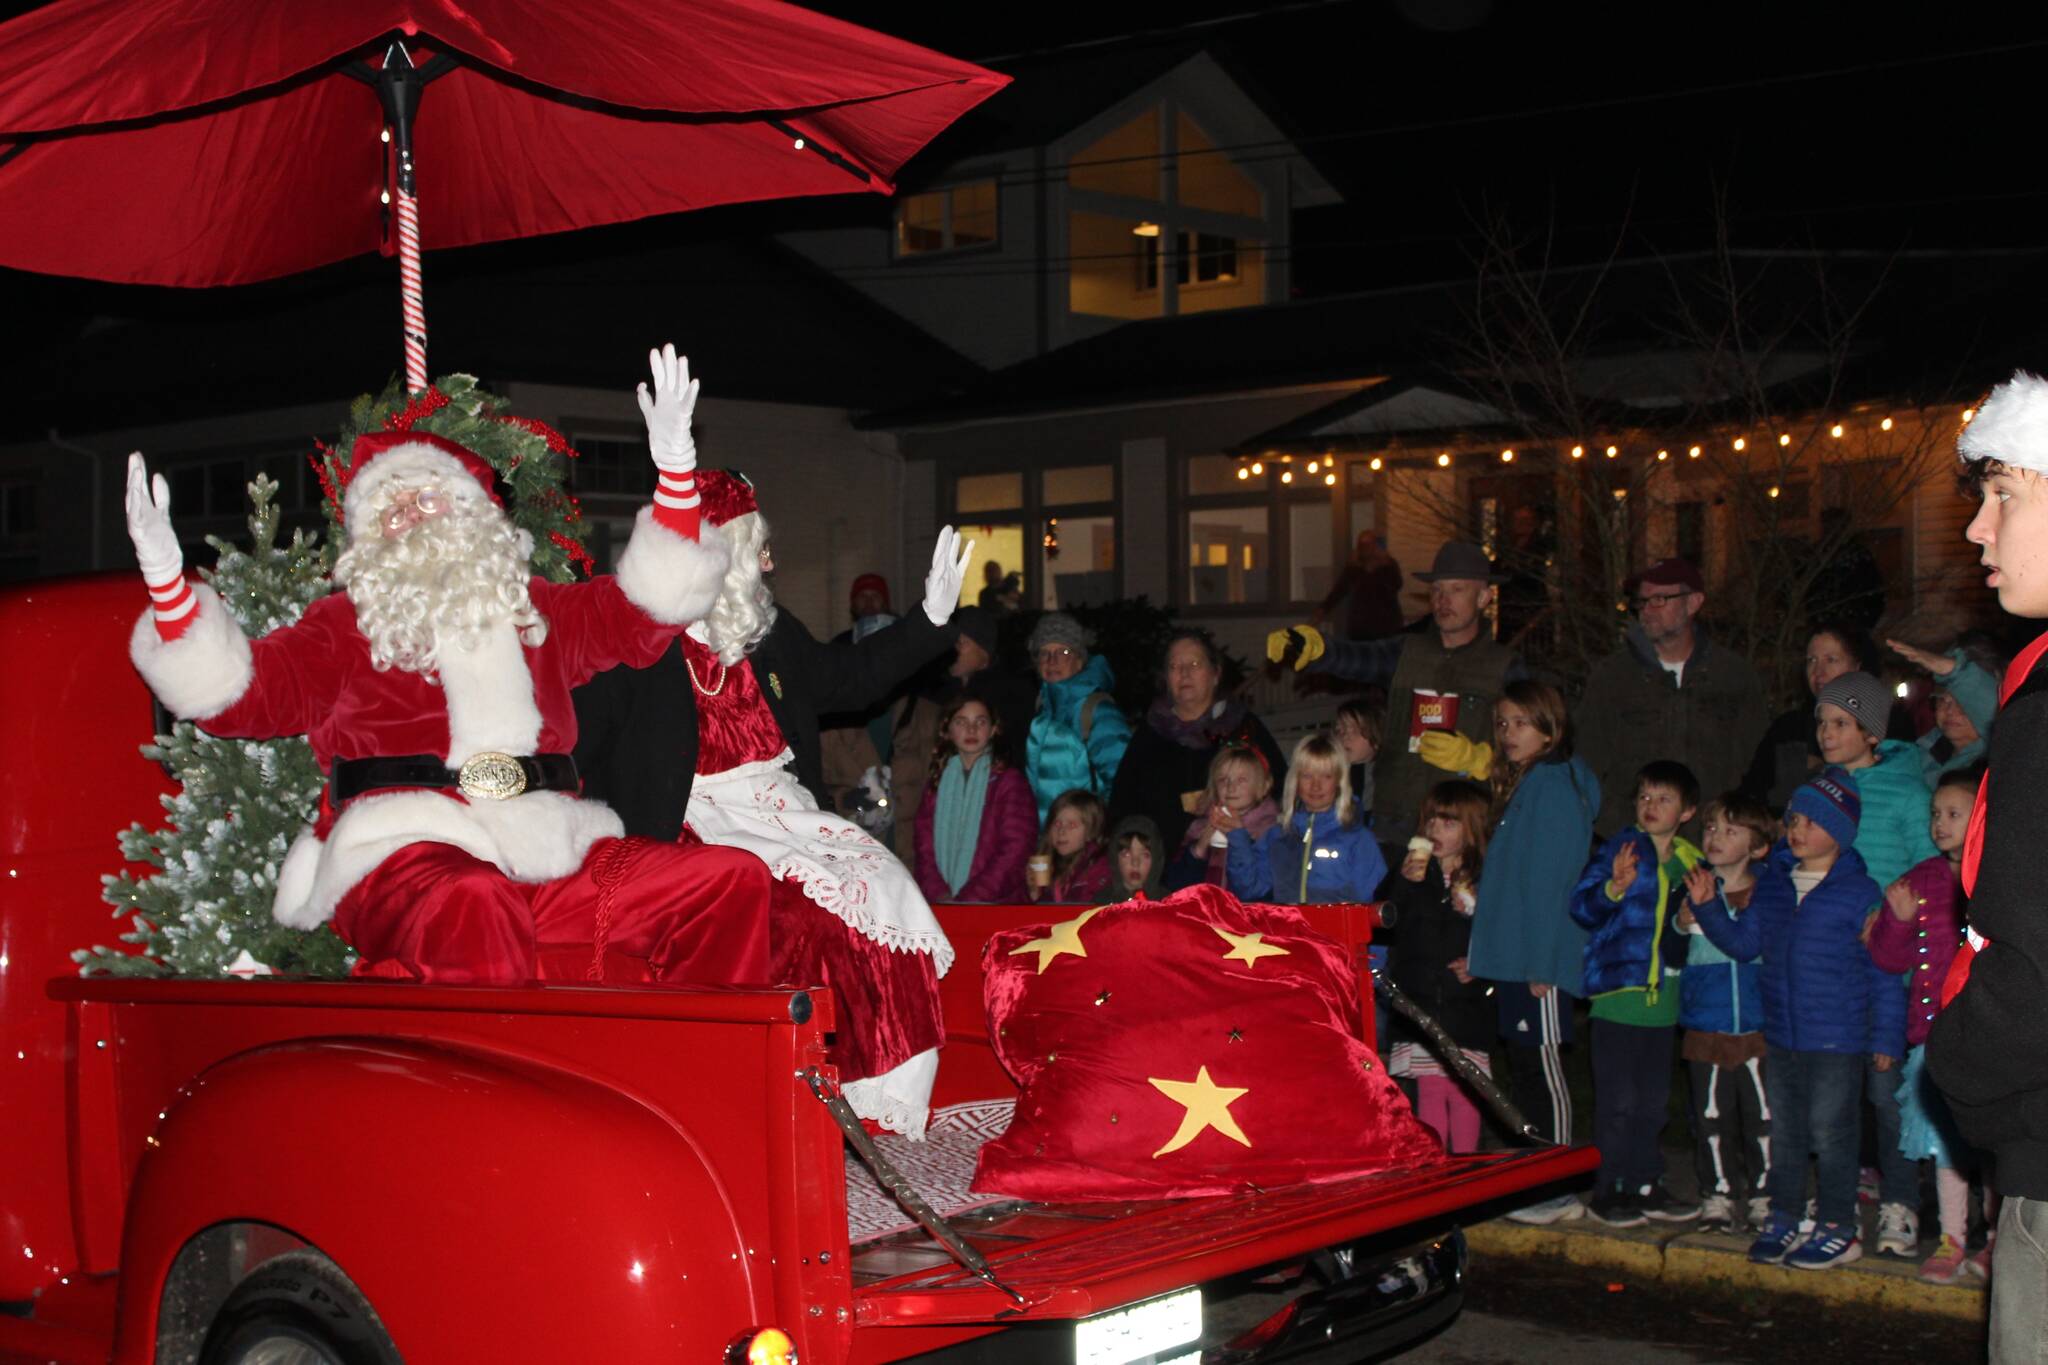 Alex Bruell photo
Santa and Mrs. Claus wave to the crowd at WinterFest.